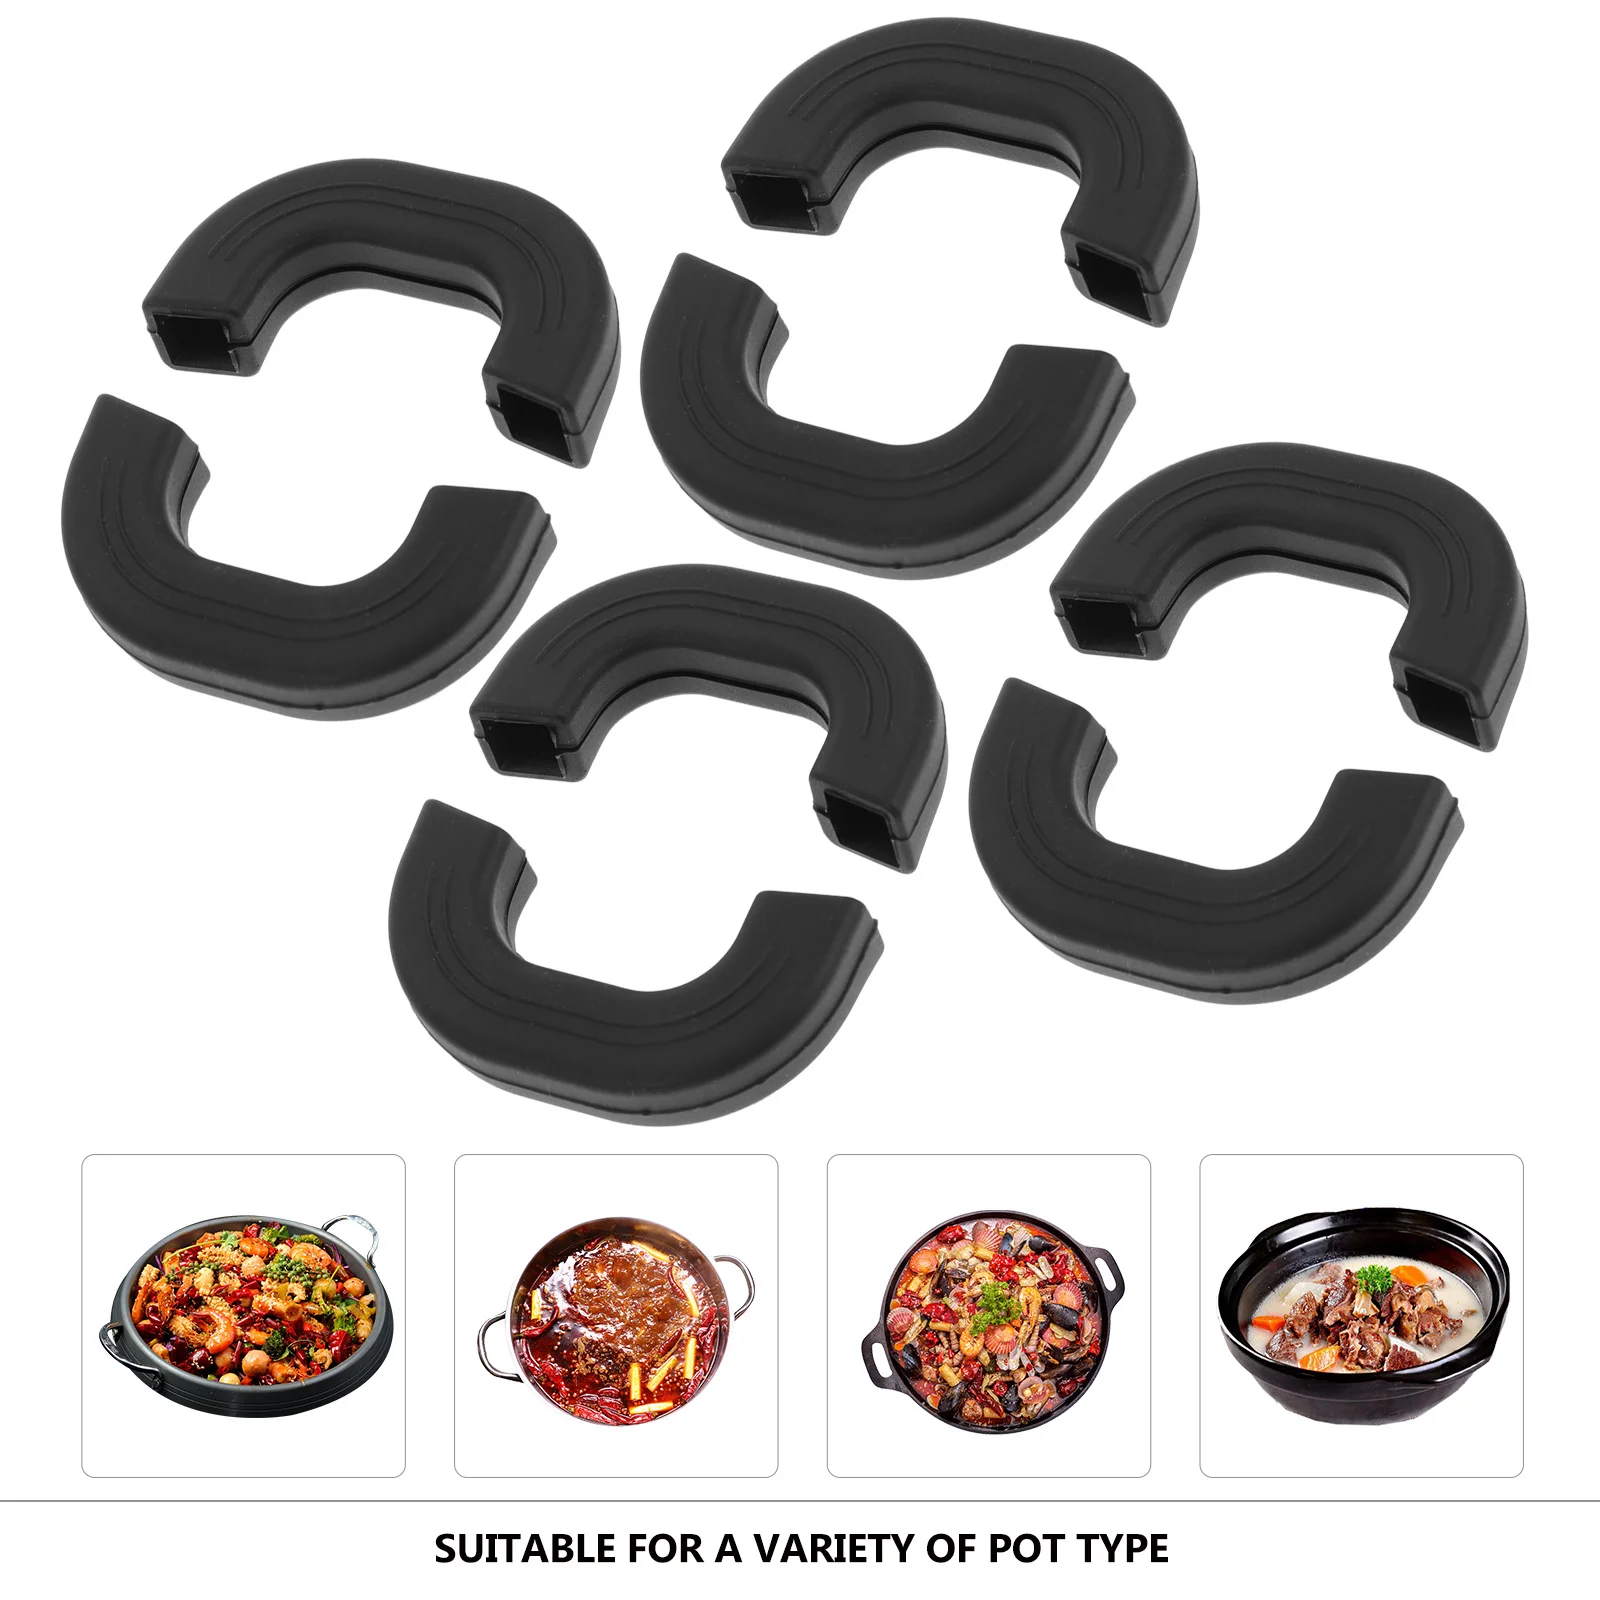 

4 Pcs Pot Earrings Silicone Pot Cover Pot Handle Sleeve Oven Handle Potholder Silica Gel Silicone Pan Grip